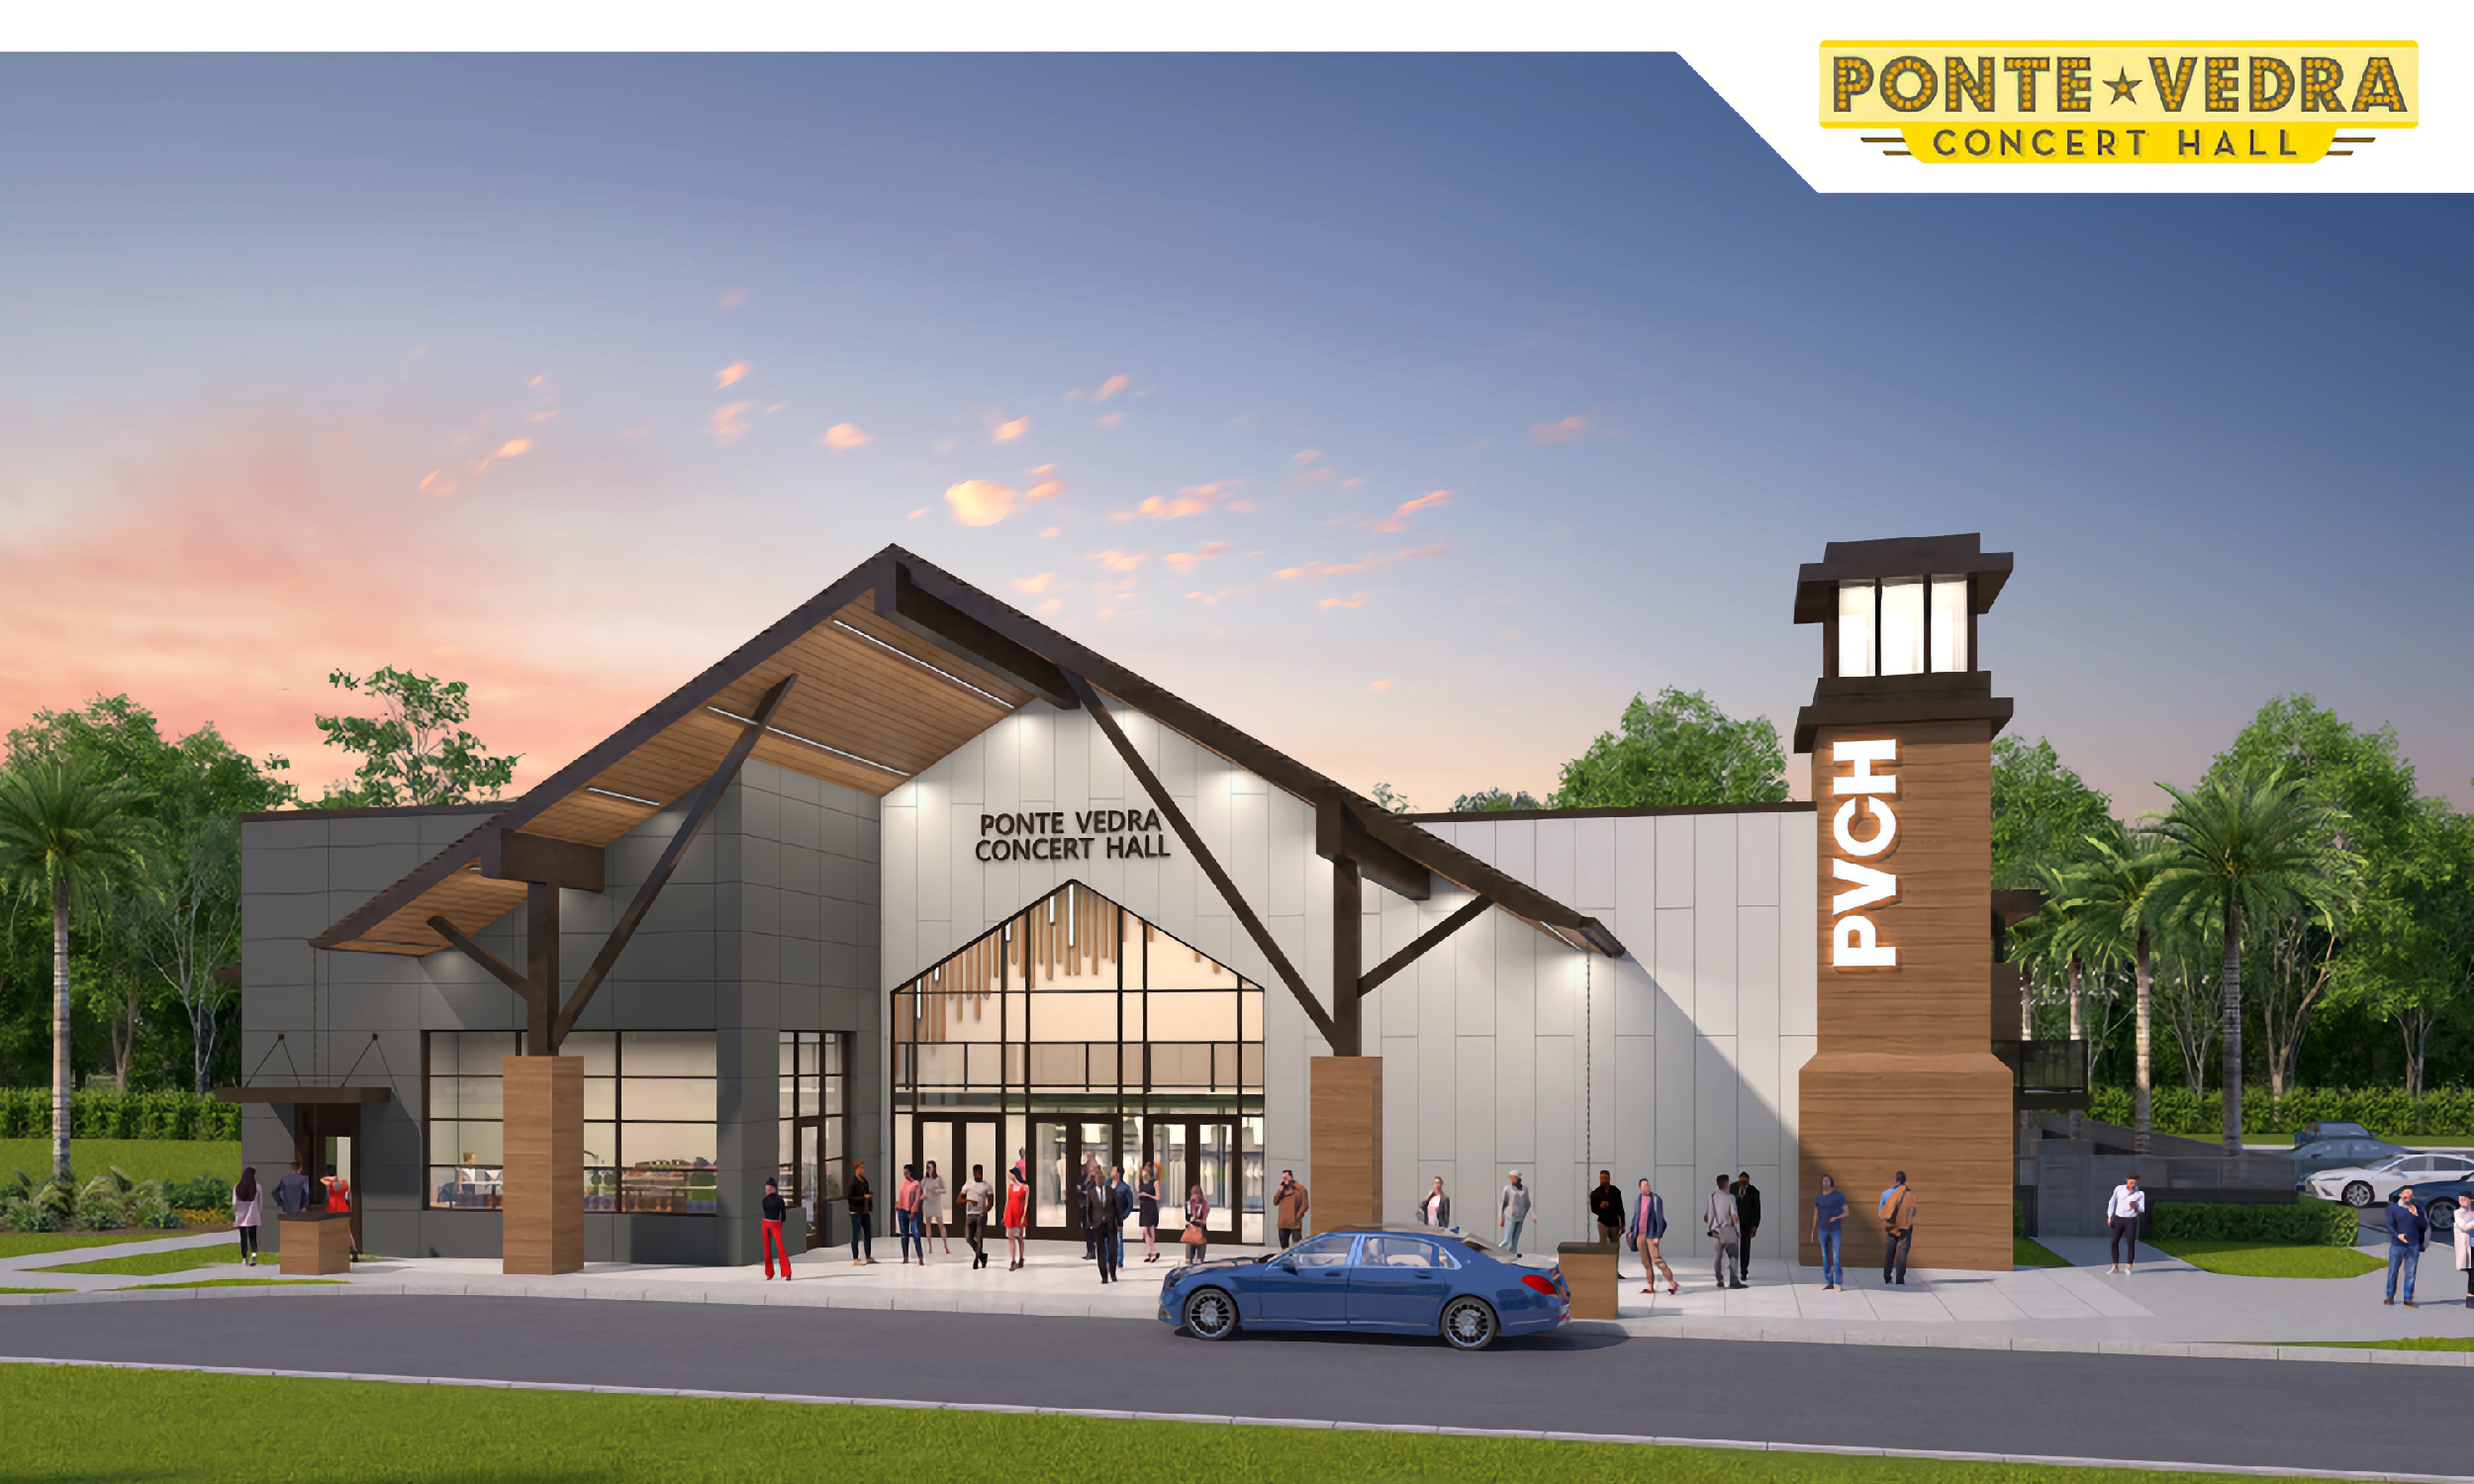 The rendition of the planned renovations of the Ponte Vedra Concert Hall